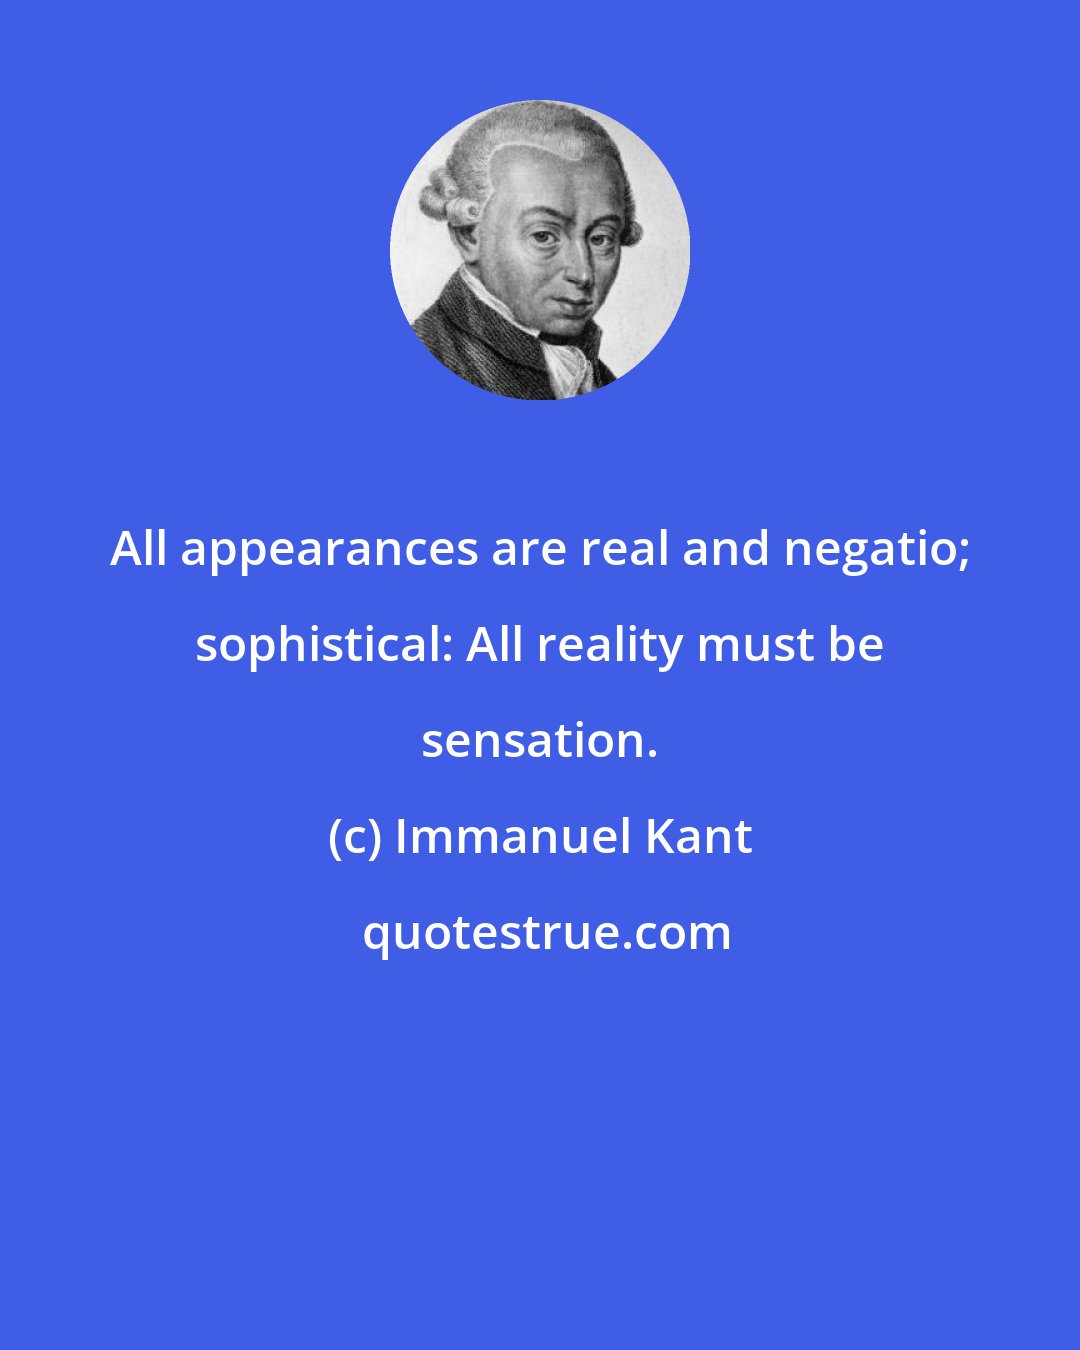 Immanuel Kant: All appearances are real and negatio; sophistical: All reality must be sensation.